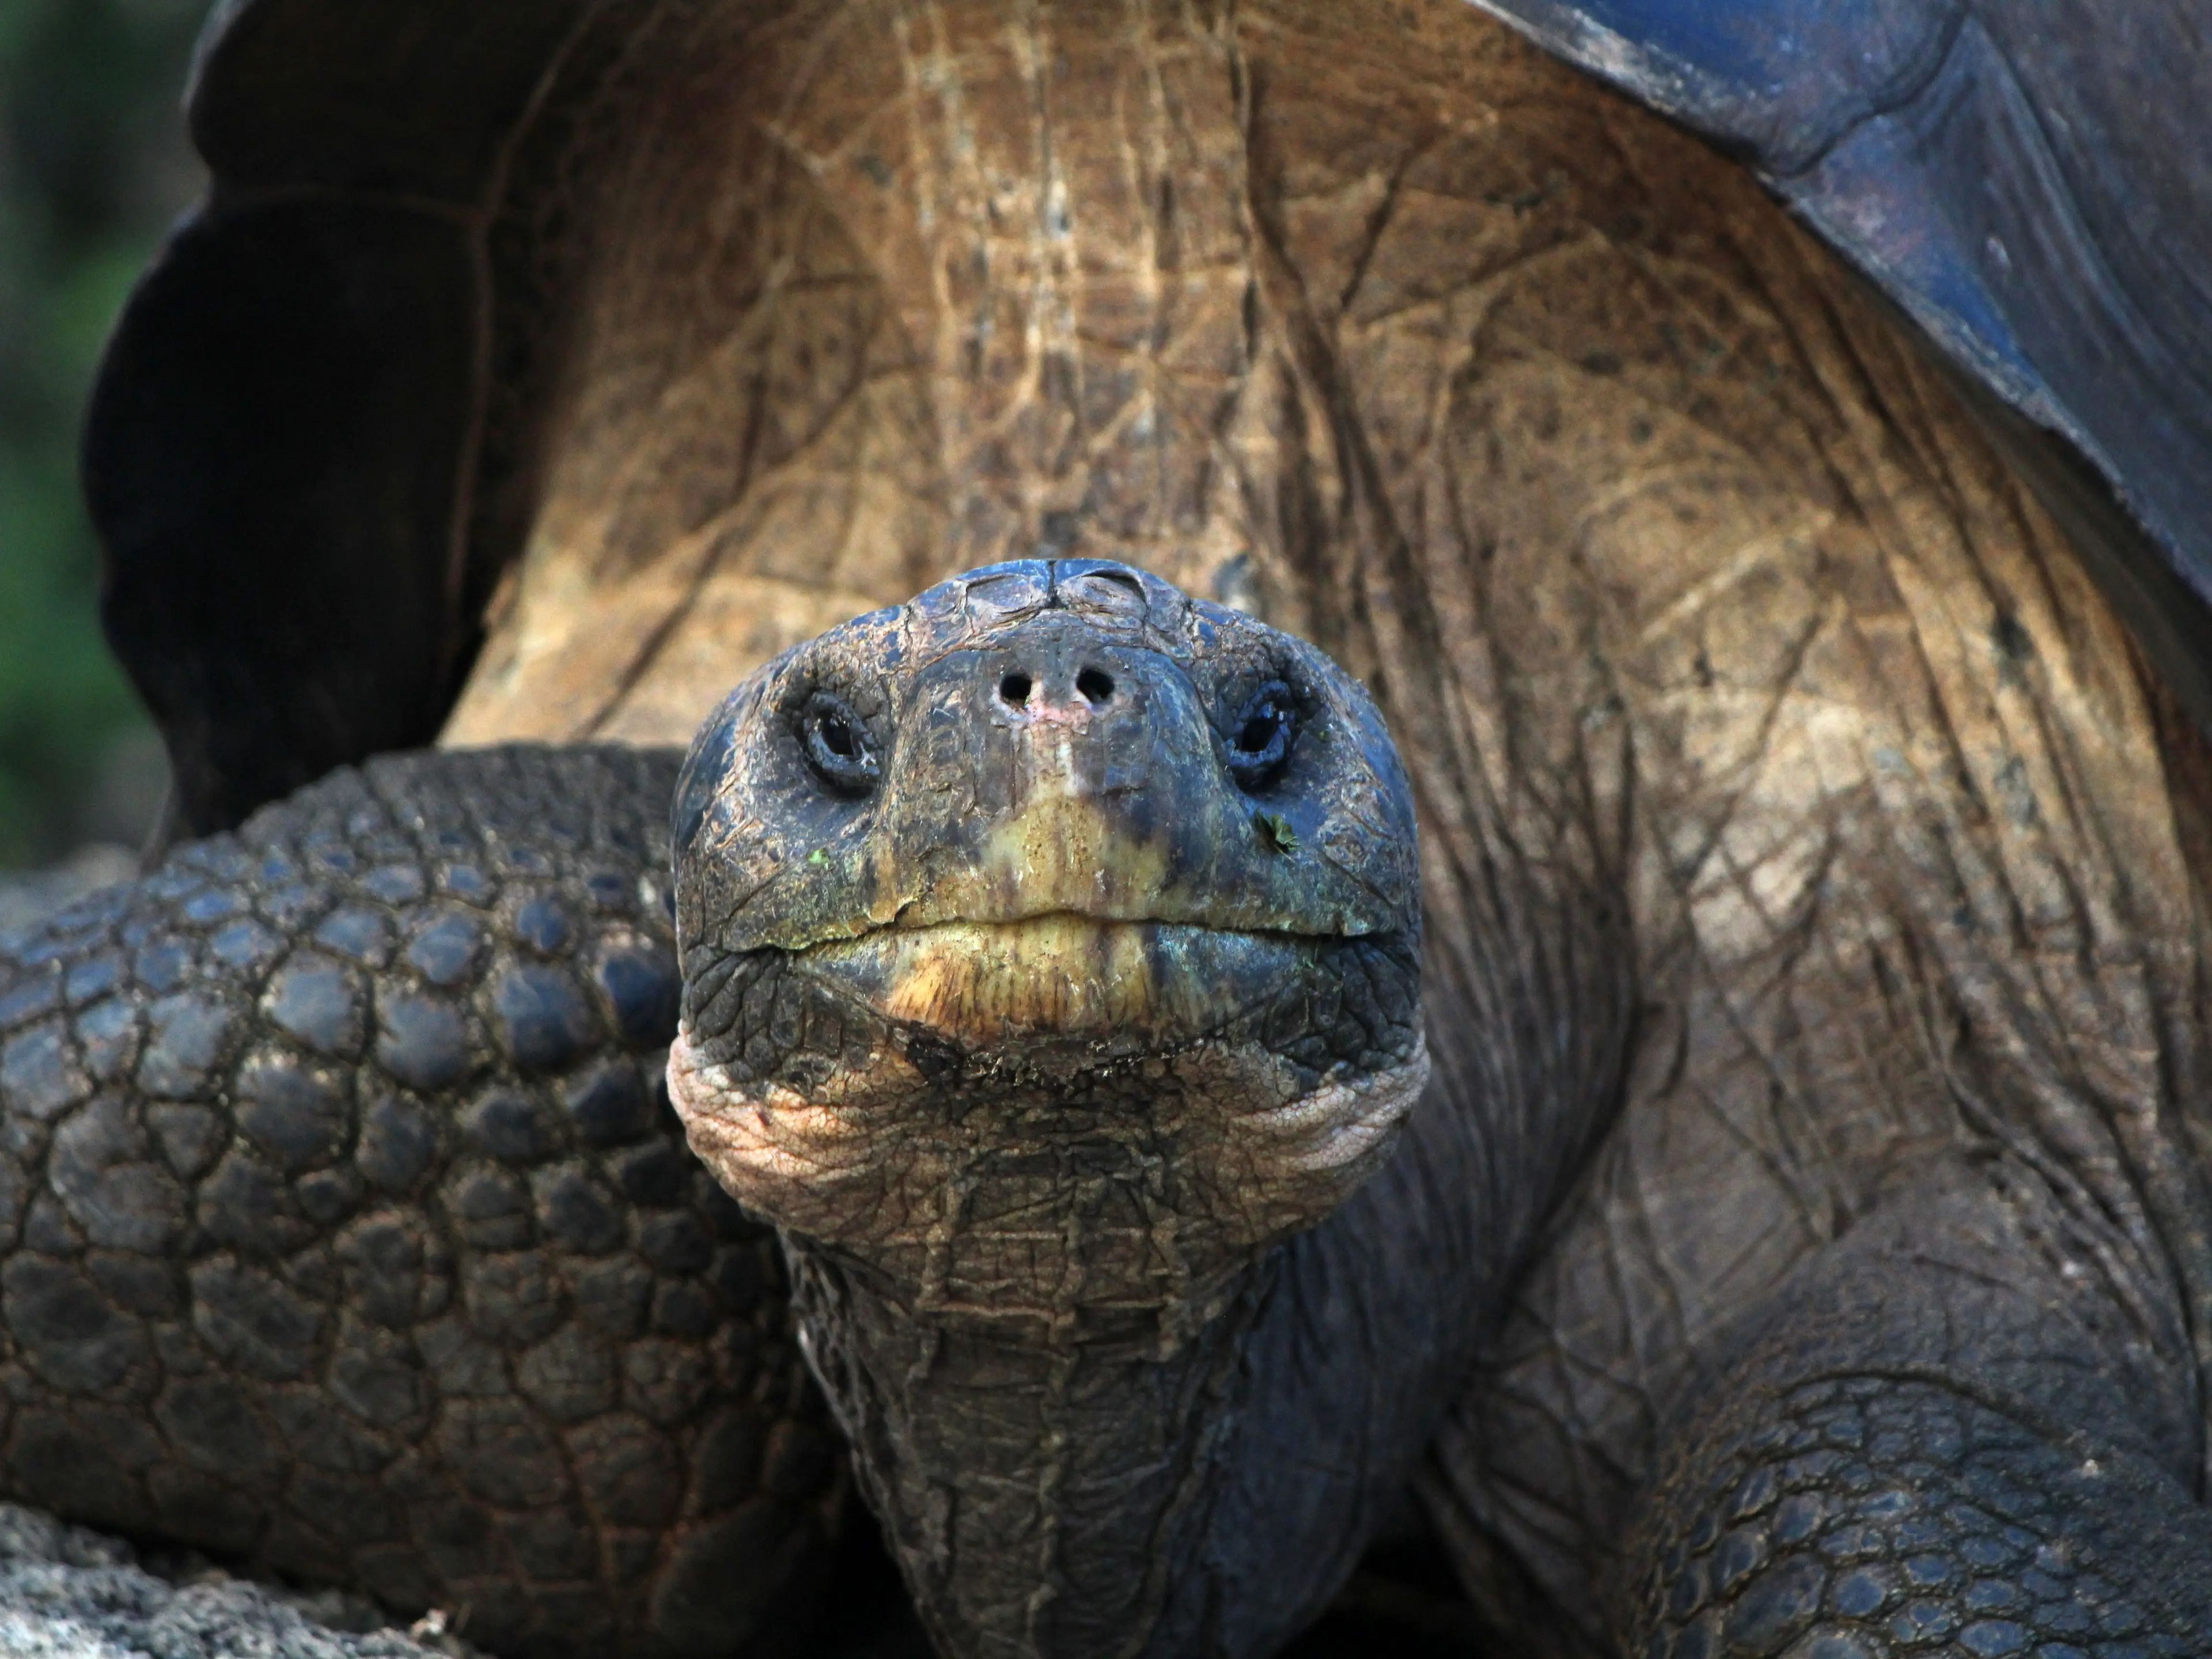 A huge tortoise looks at the camera.